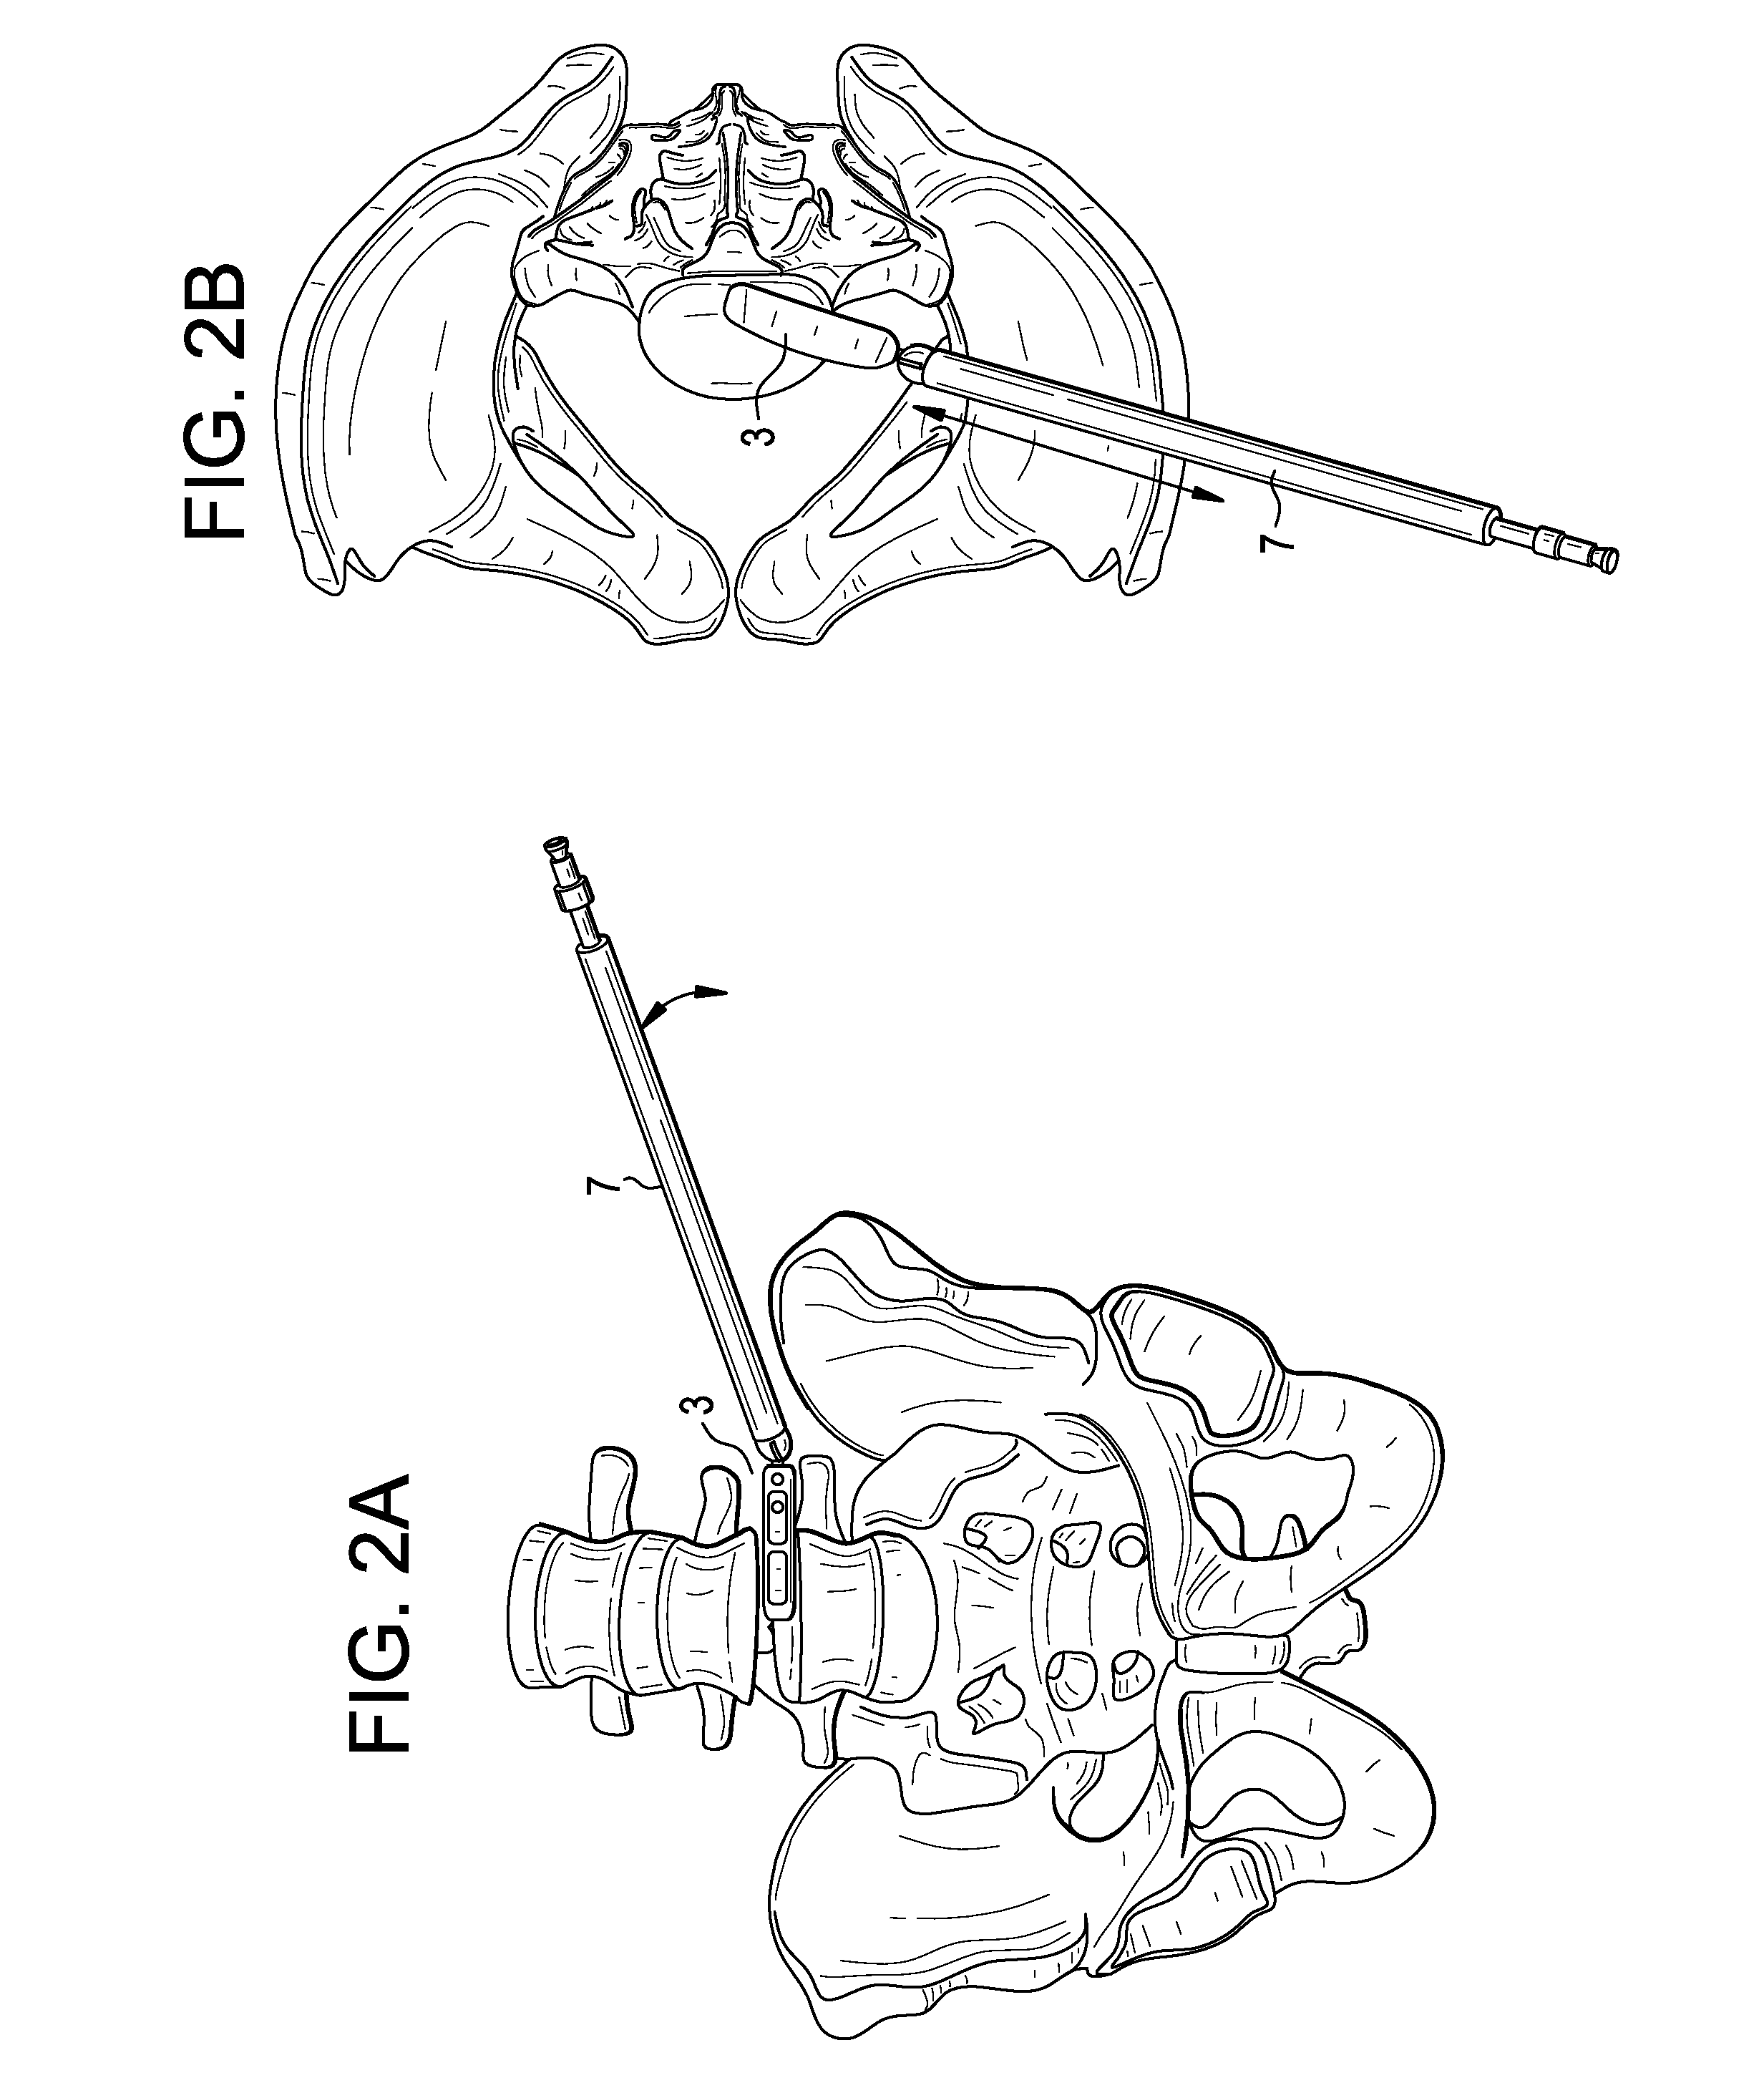 Polyaxial Articulating Instrument